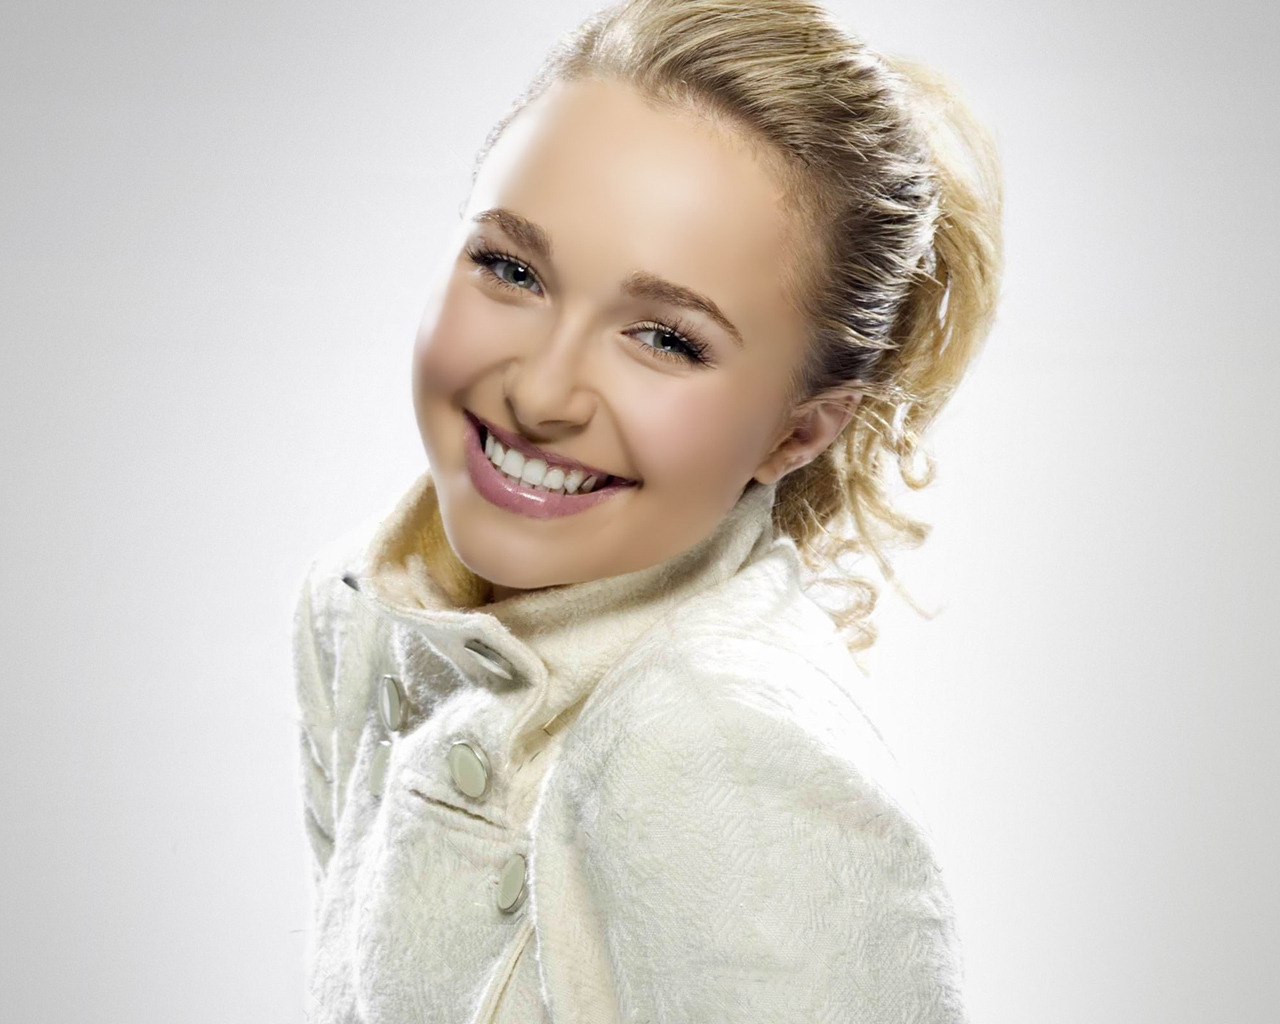 Hayden Panettiere Cute Smile for 1280 x 1024 resolution